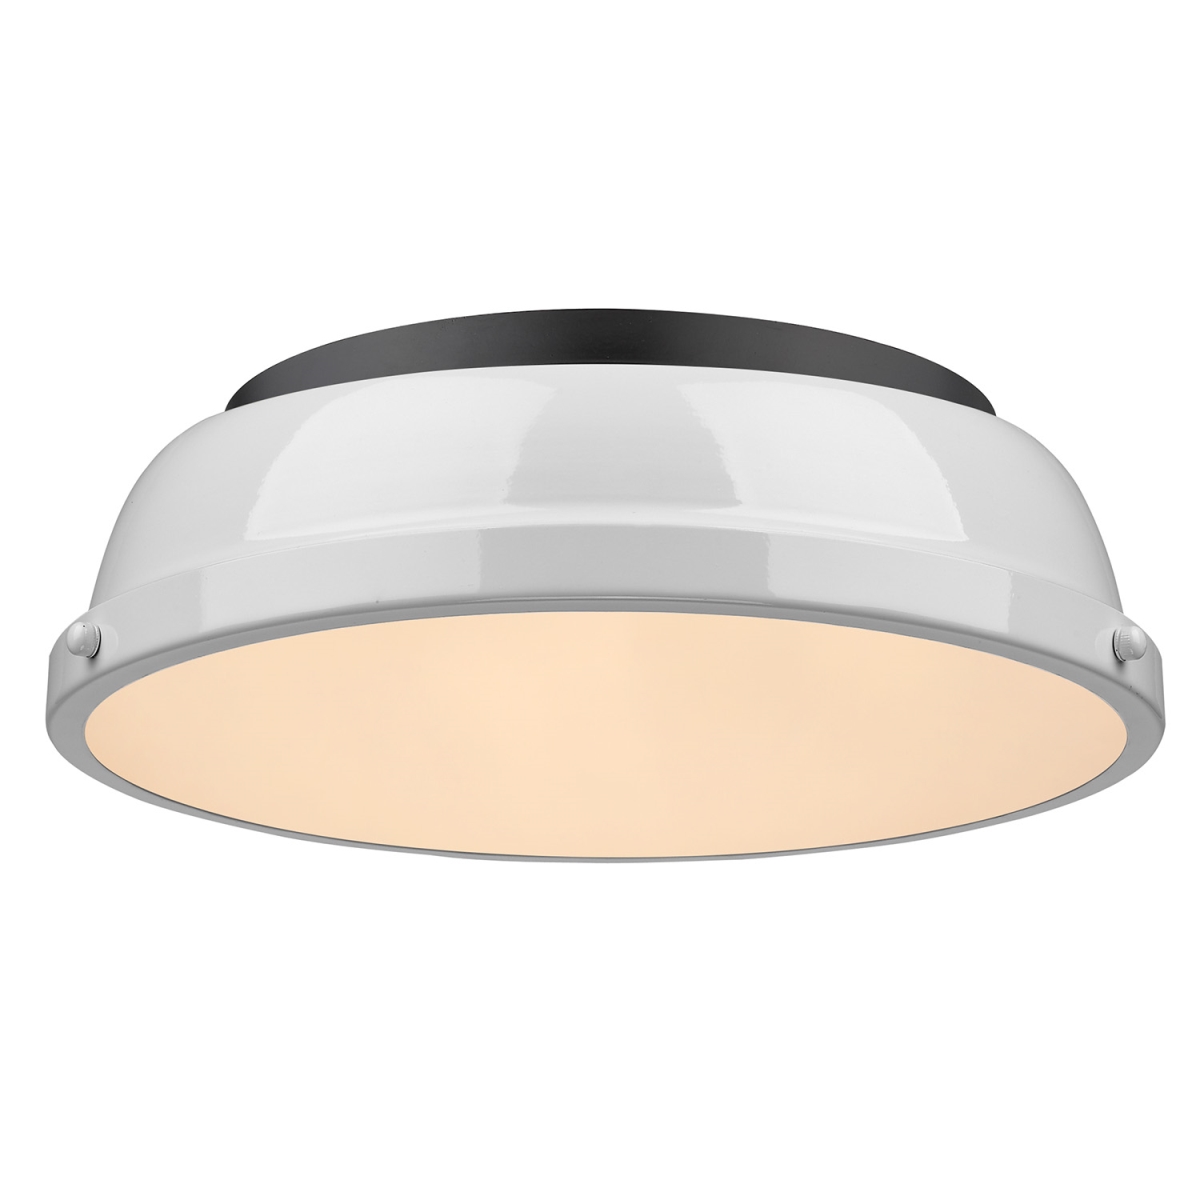 3602-14 Blk-wh Duncan 14 In. Flush Mount Light With White Shade, Black